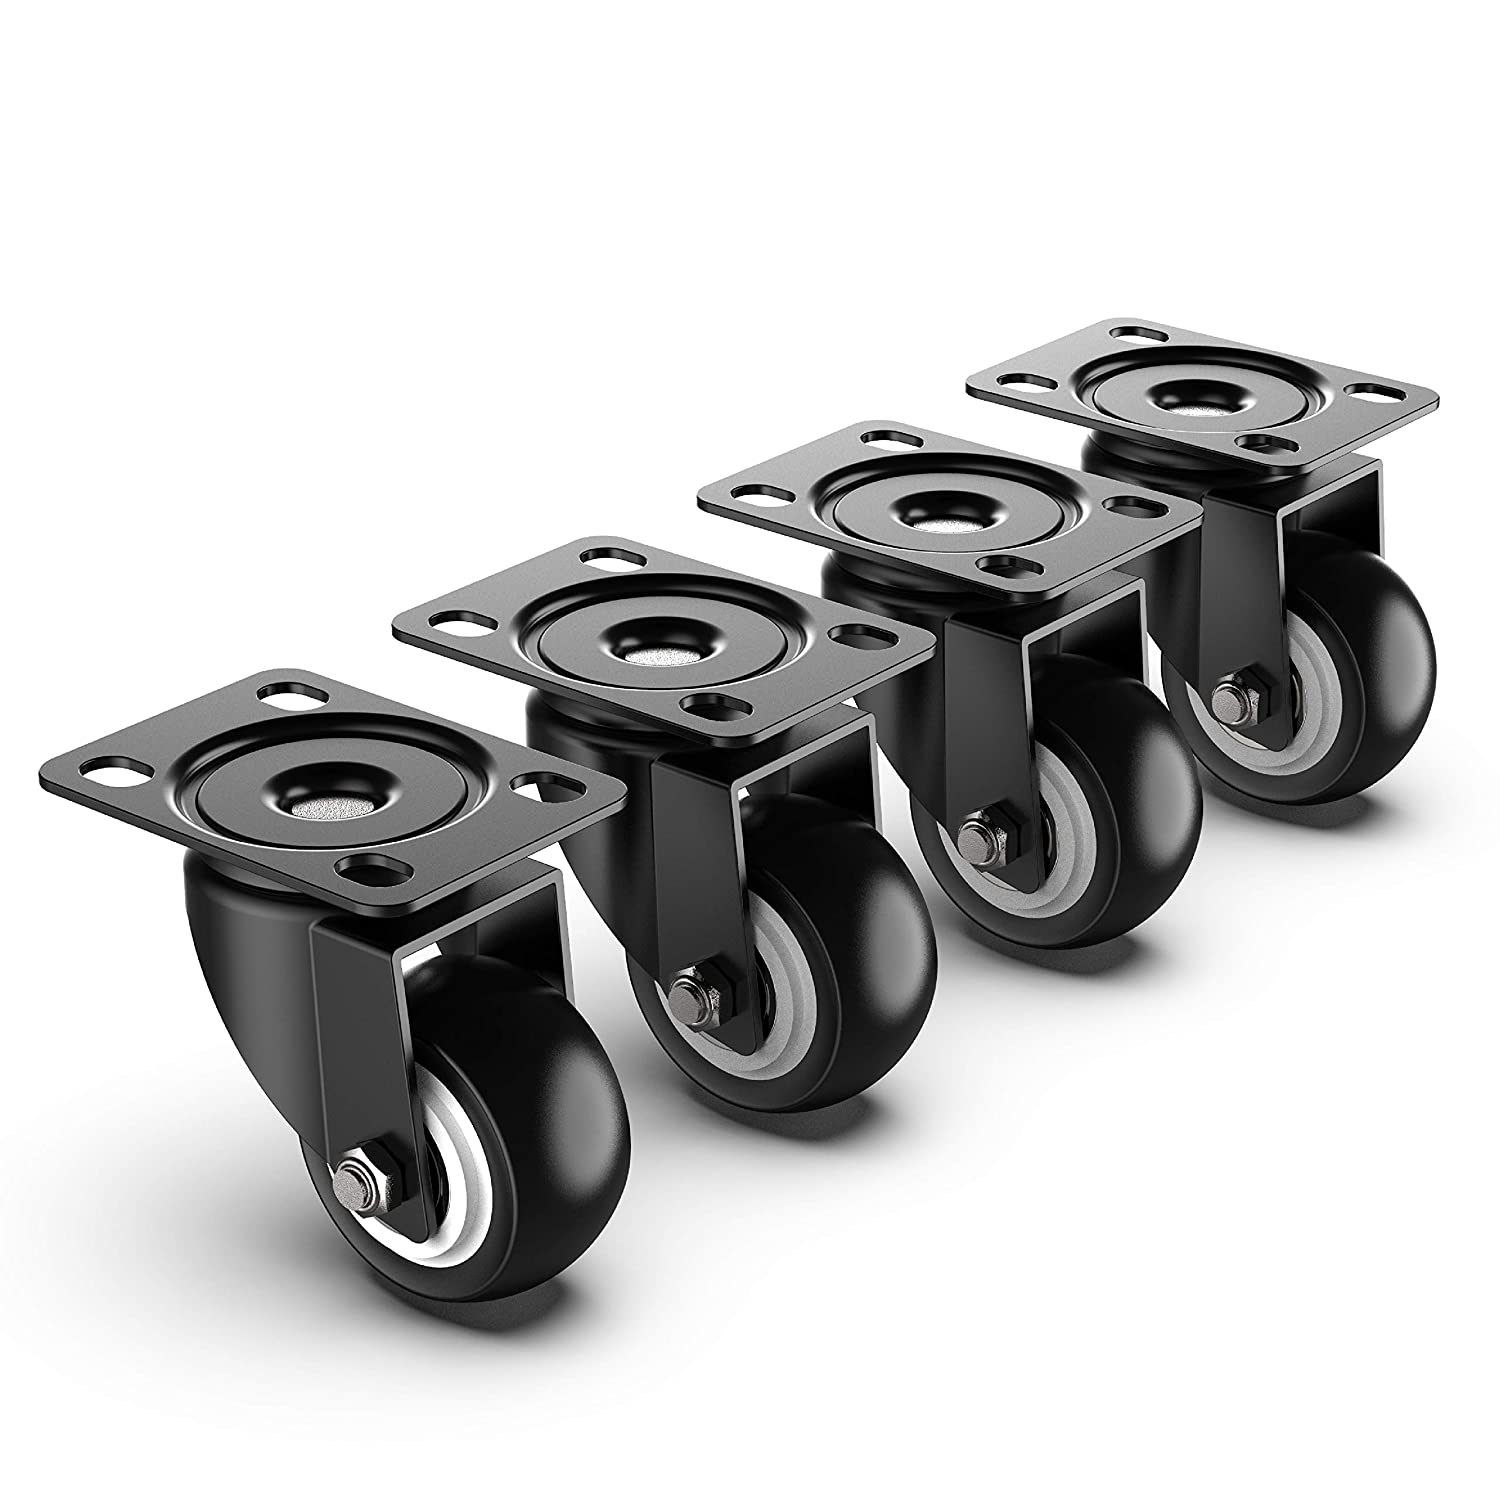 Swivel chair parts suppliers wholesale high quality caster wheels